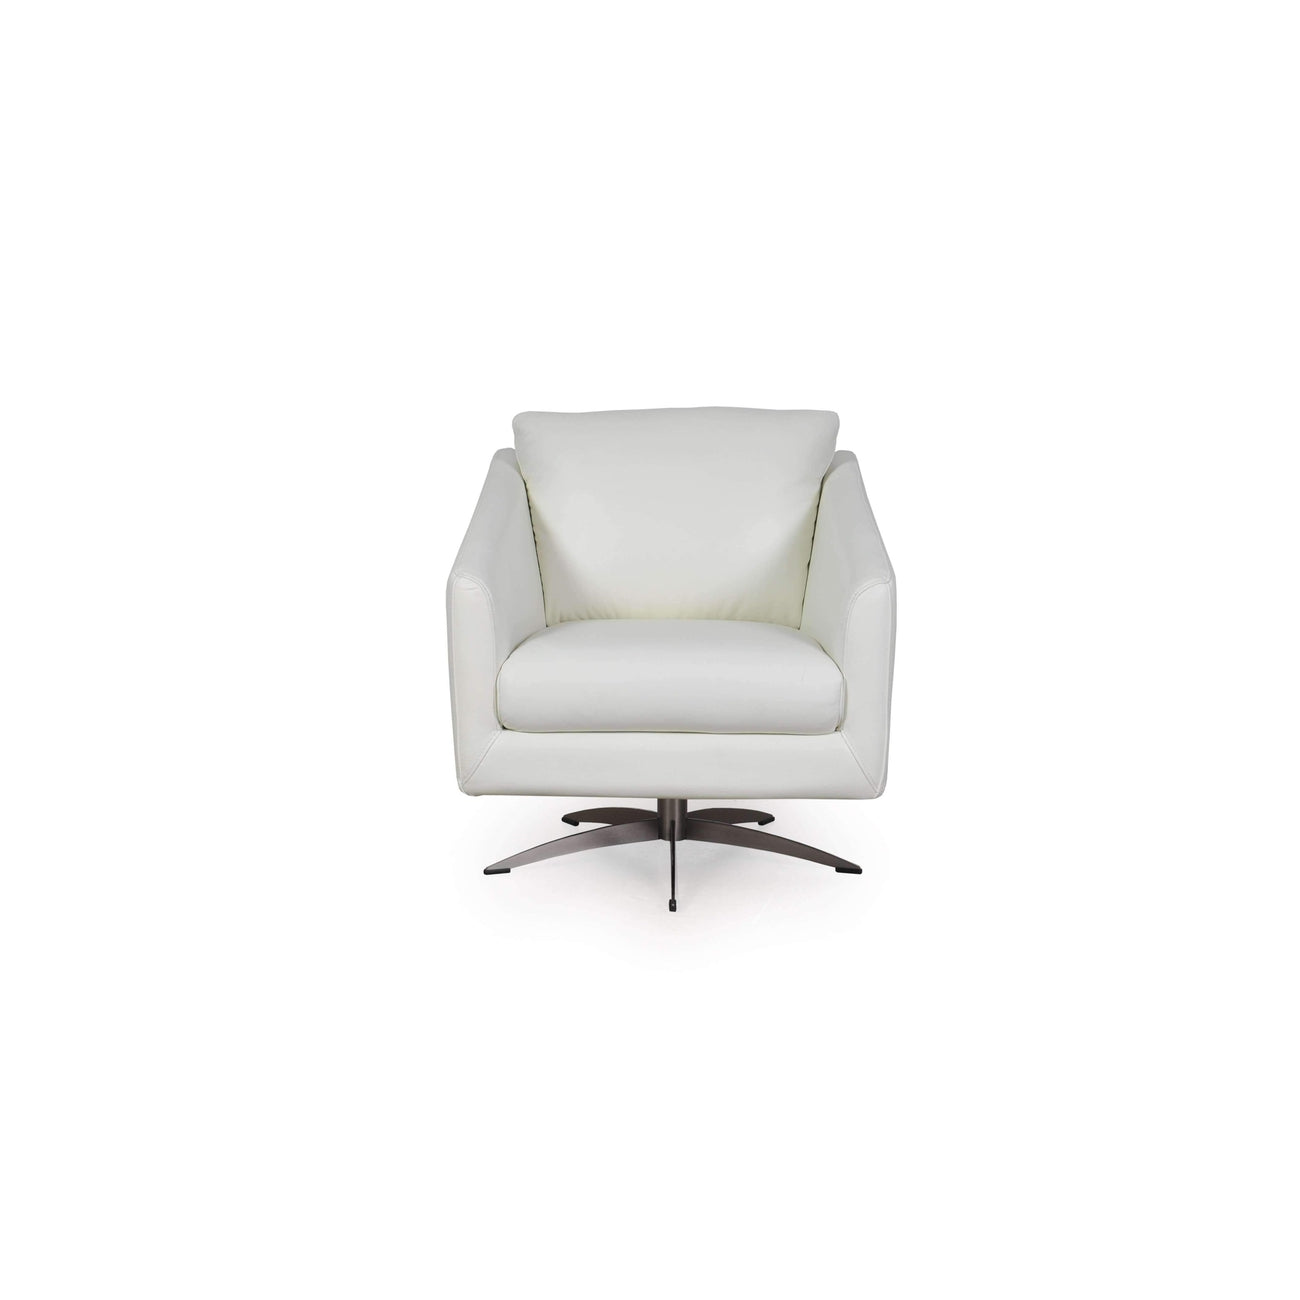 Classic Modern Chair-Moroni Leather-MORONI-530061296-Lounge Chairs-2-France and Son